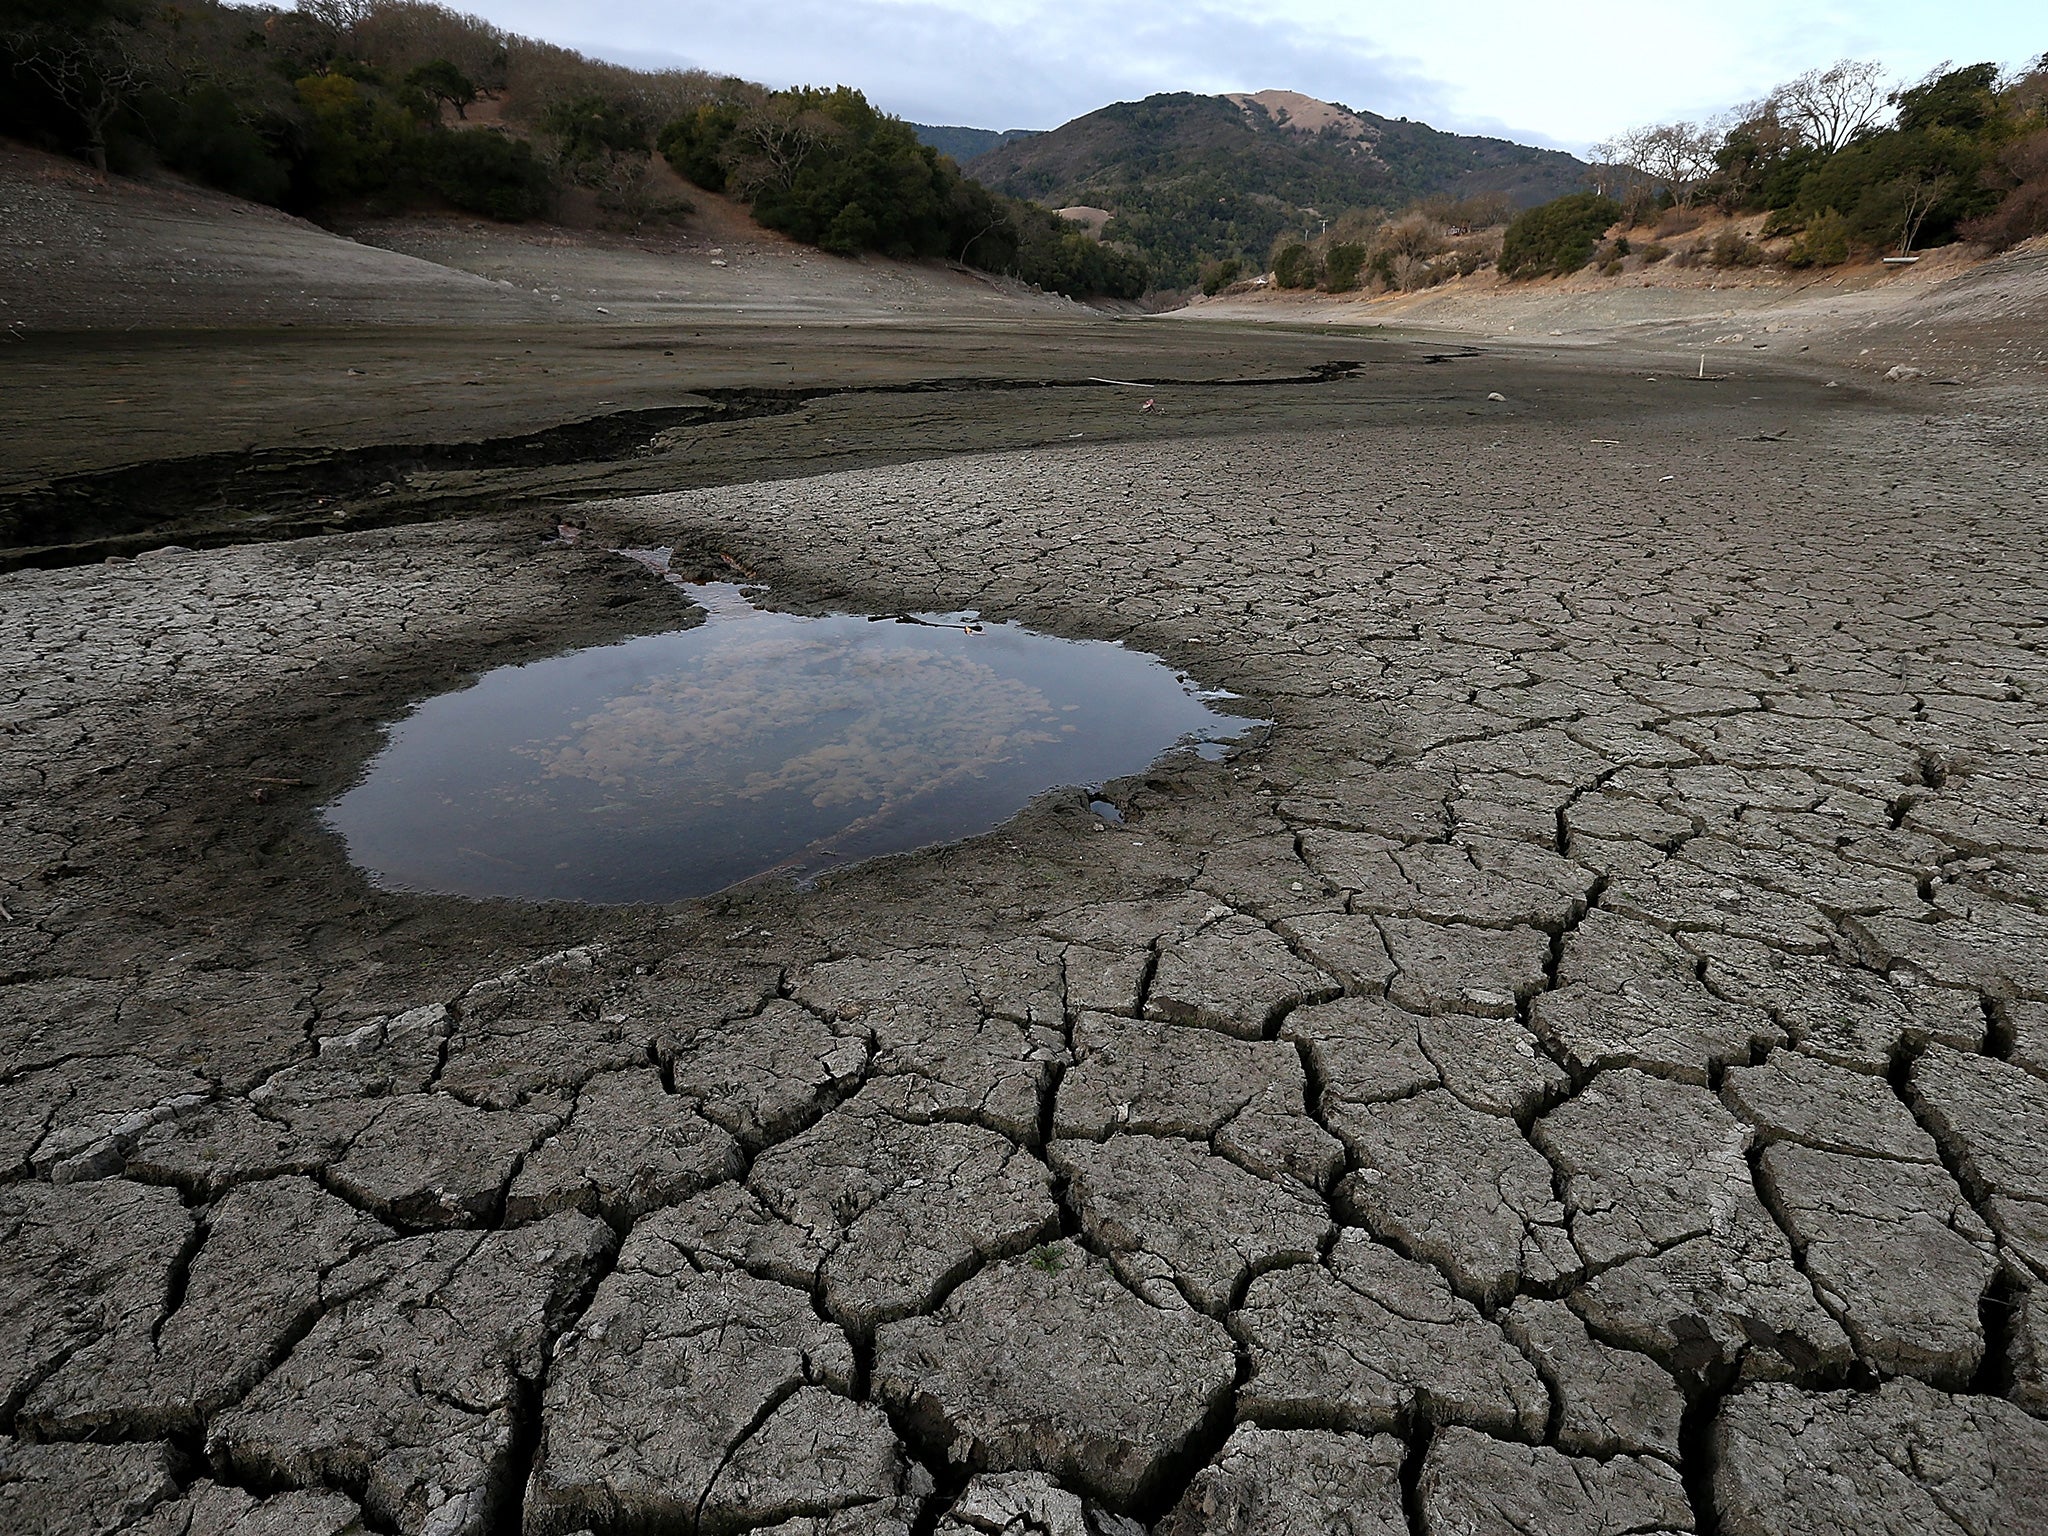 A small pool of water is surrounded by dried and cracked earth that was the bottom of the Almaden Reservoir in San Jose, California